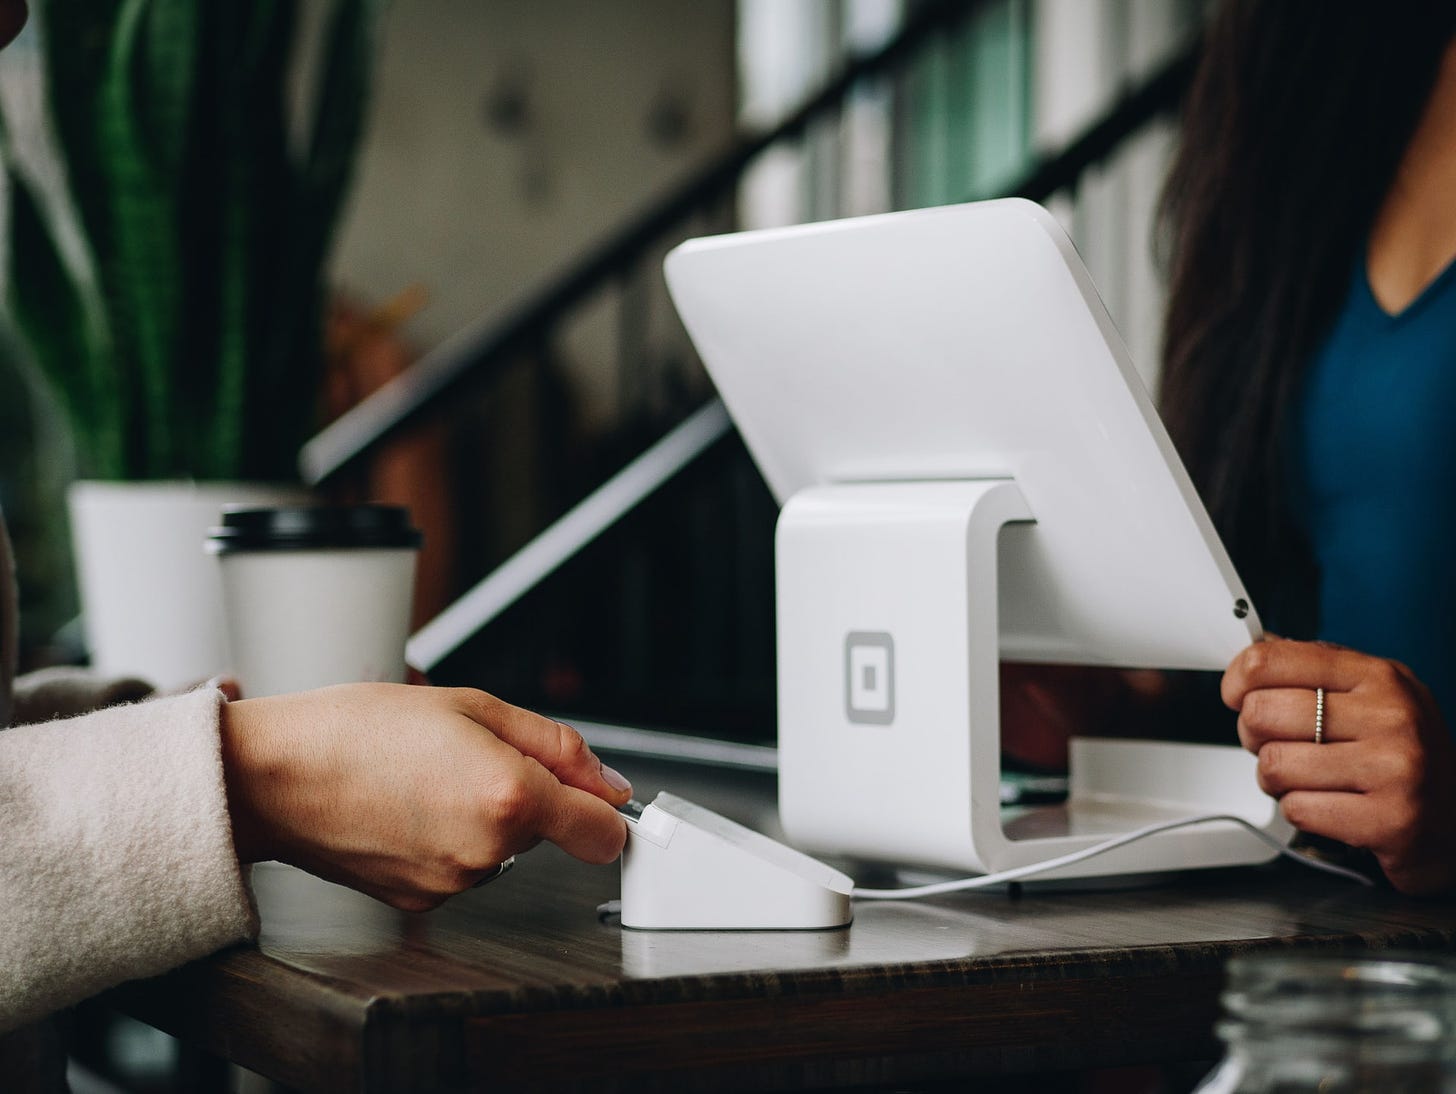 10 Best POS Square Alternatives for Small Businesses in 2021